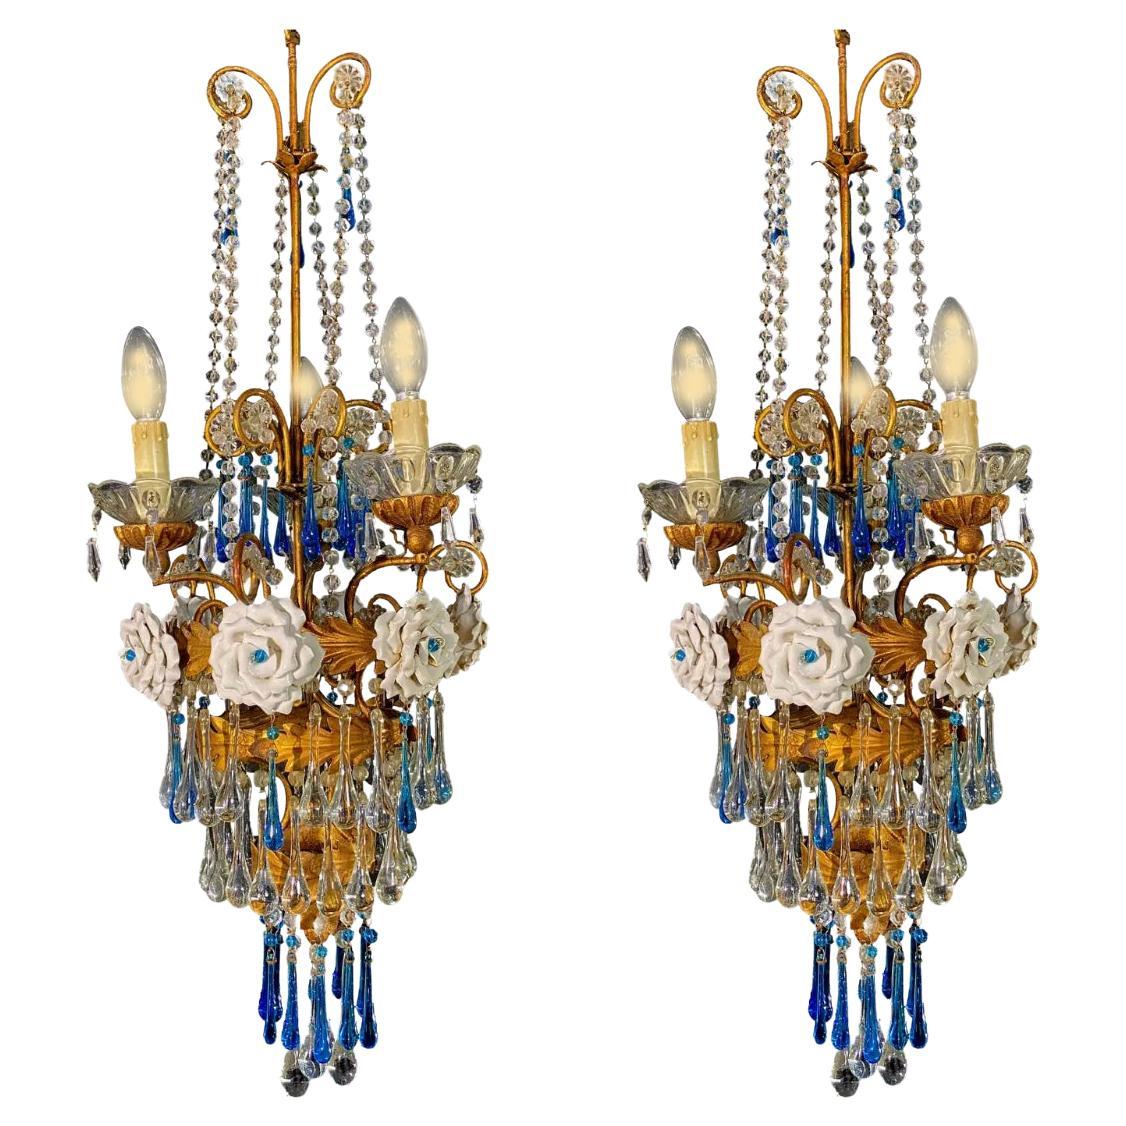 Pair of Lovely Chandeliers with White Roses and Blue Drops, Murano, 1950s